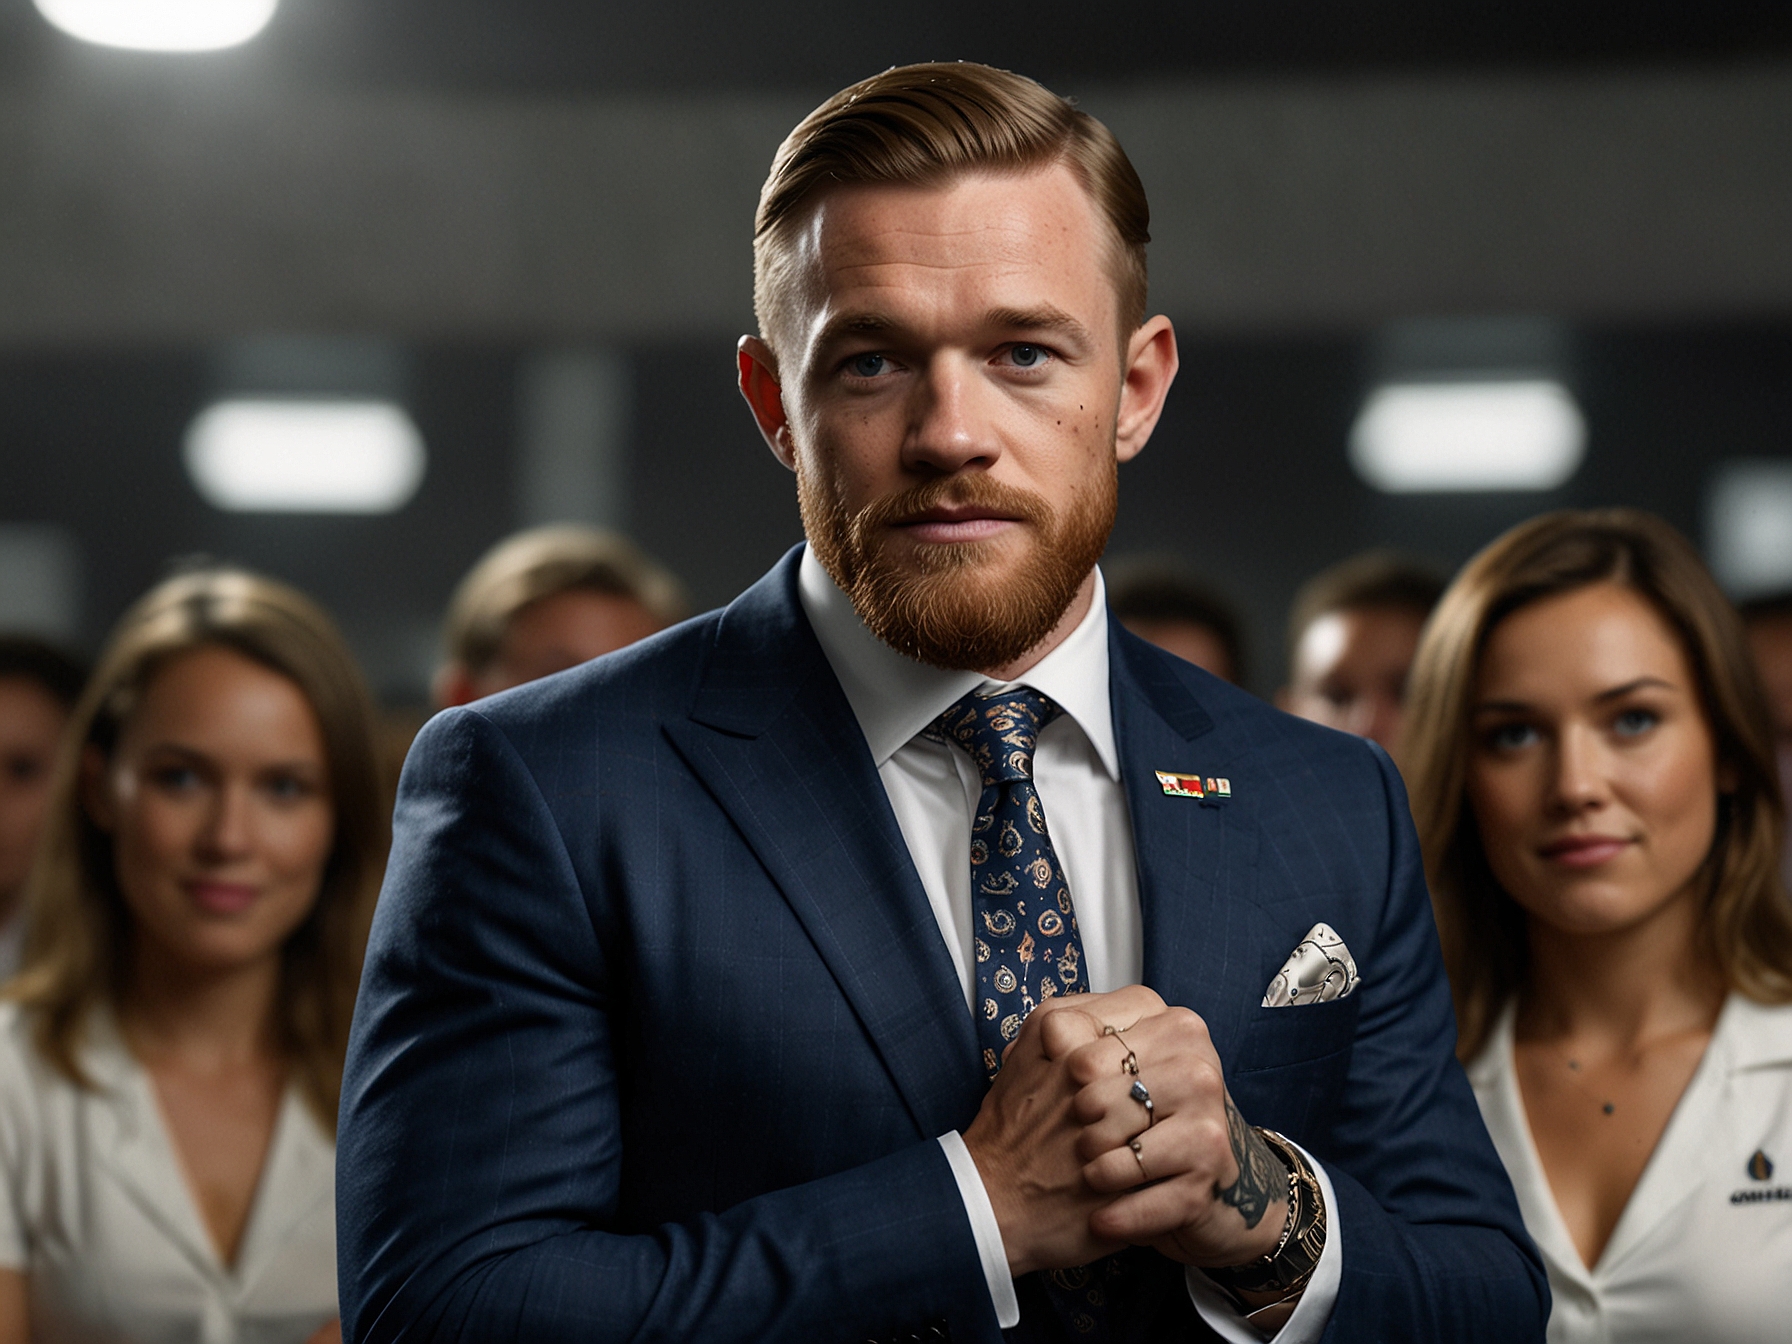 McGregor engaging with fans and promoting his business ventures at the public event, showcasing his resilience and unwavering commitment despite the challenges of his injury.